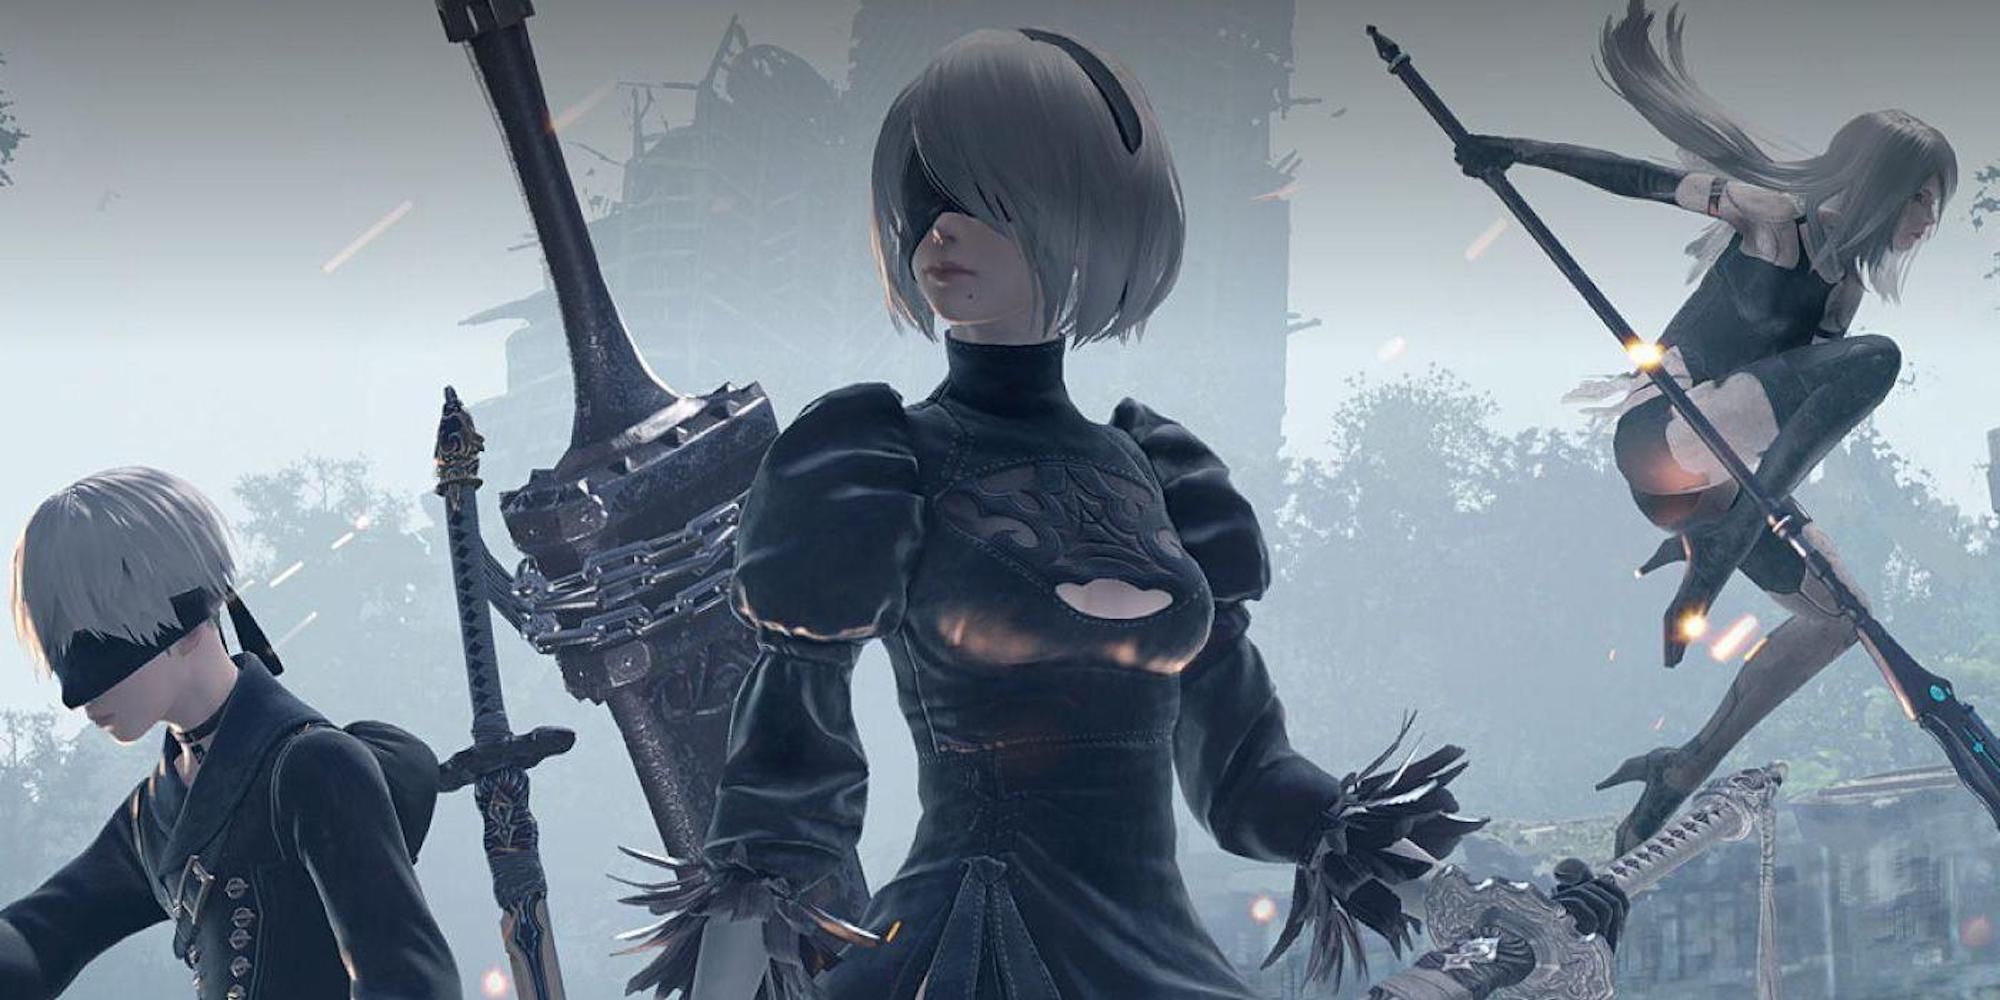 Promo art featuring characters from NieR: Automata